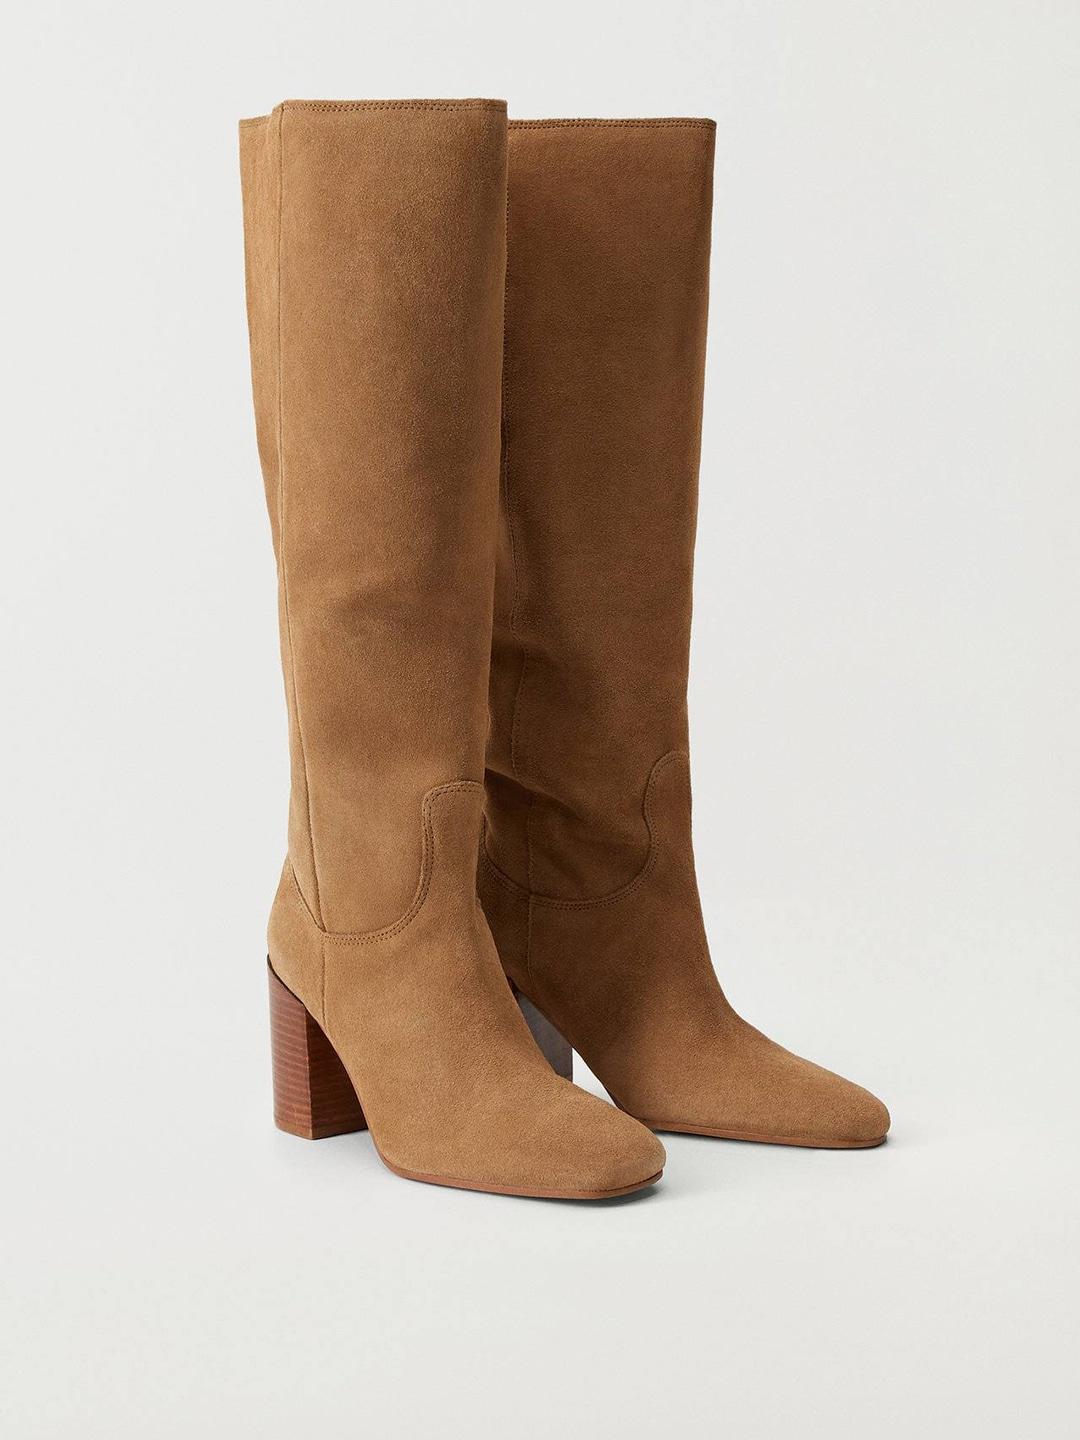 mango-women-brown-solid-knee-high-length-leather-slouchy-boots